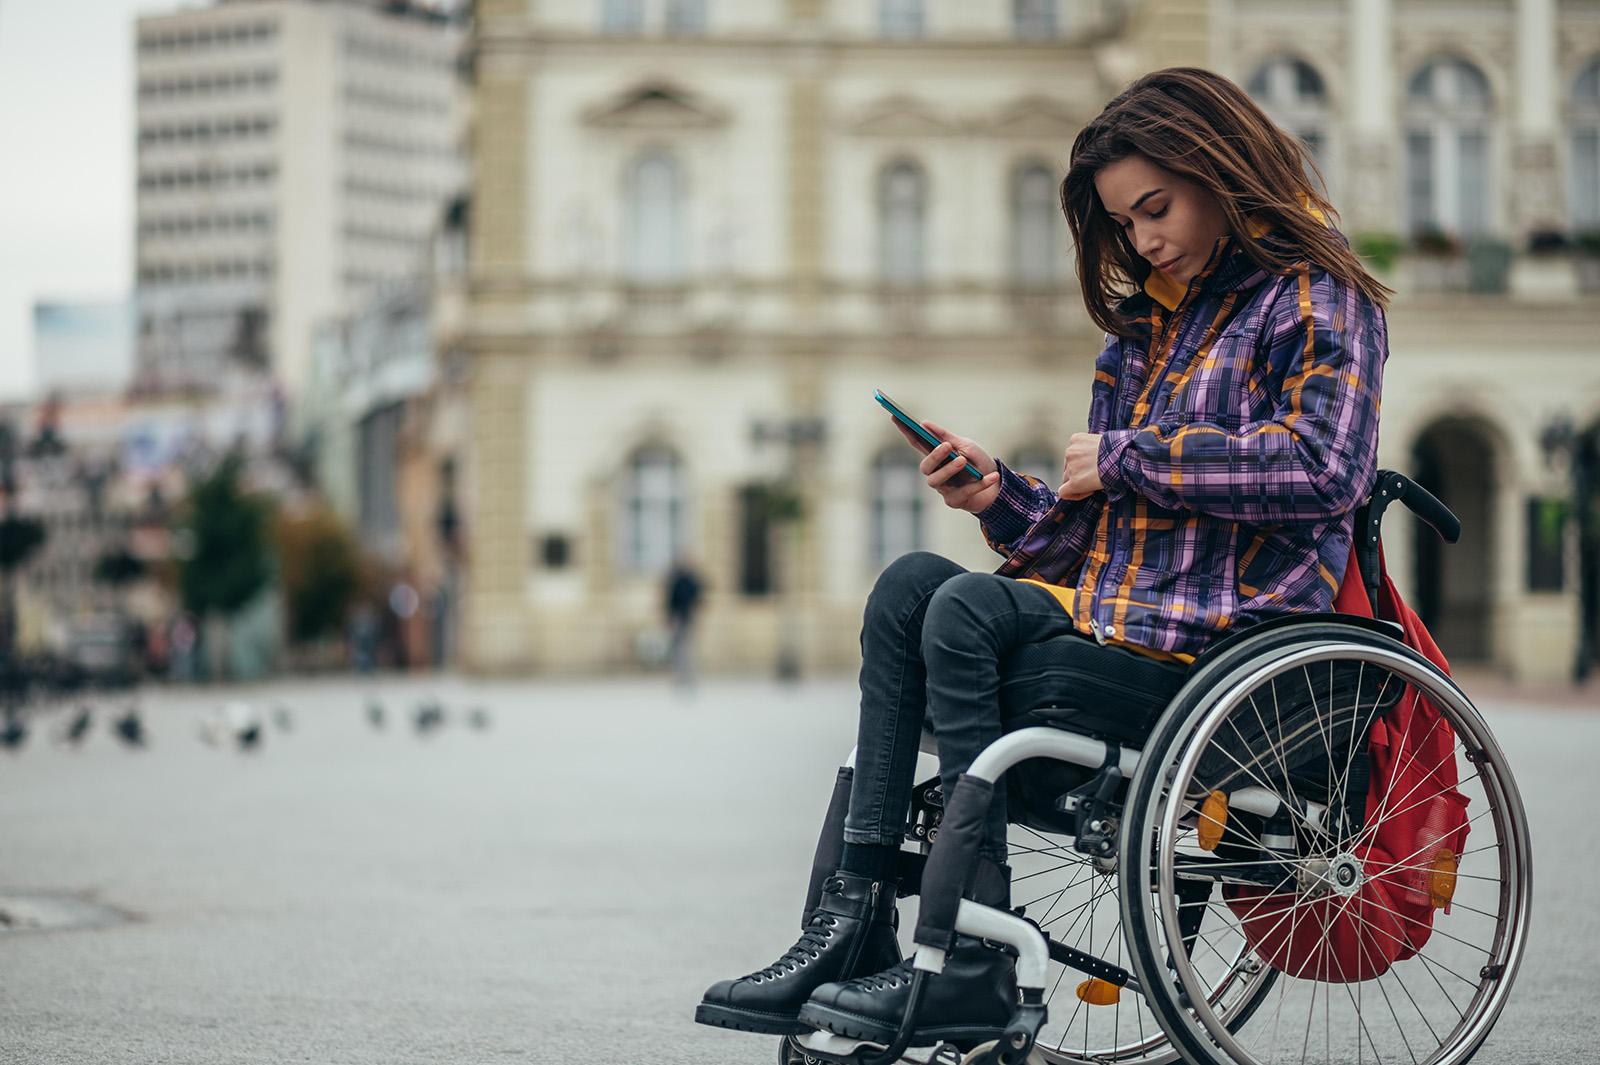 A woman in a wheelchair in a town square